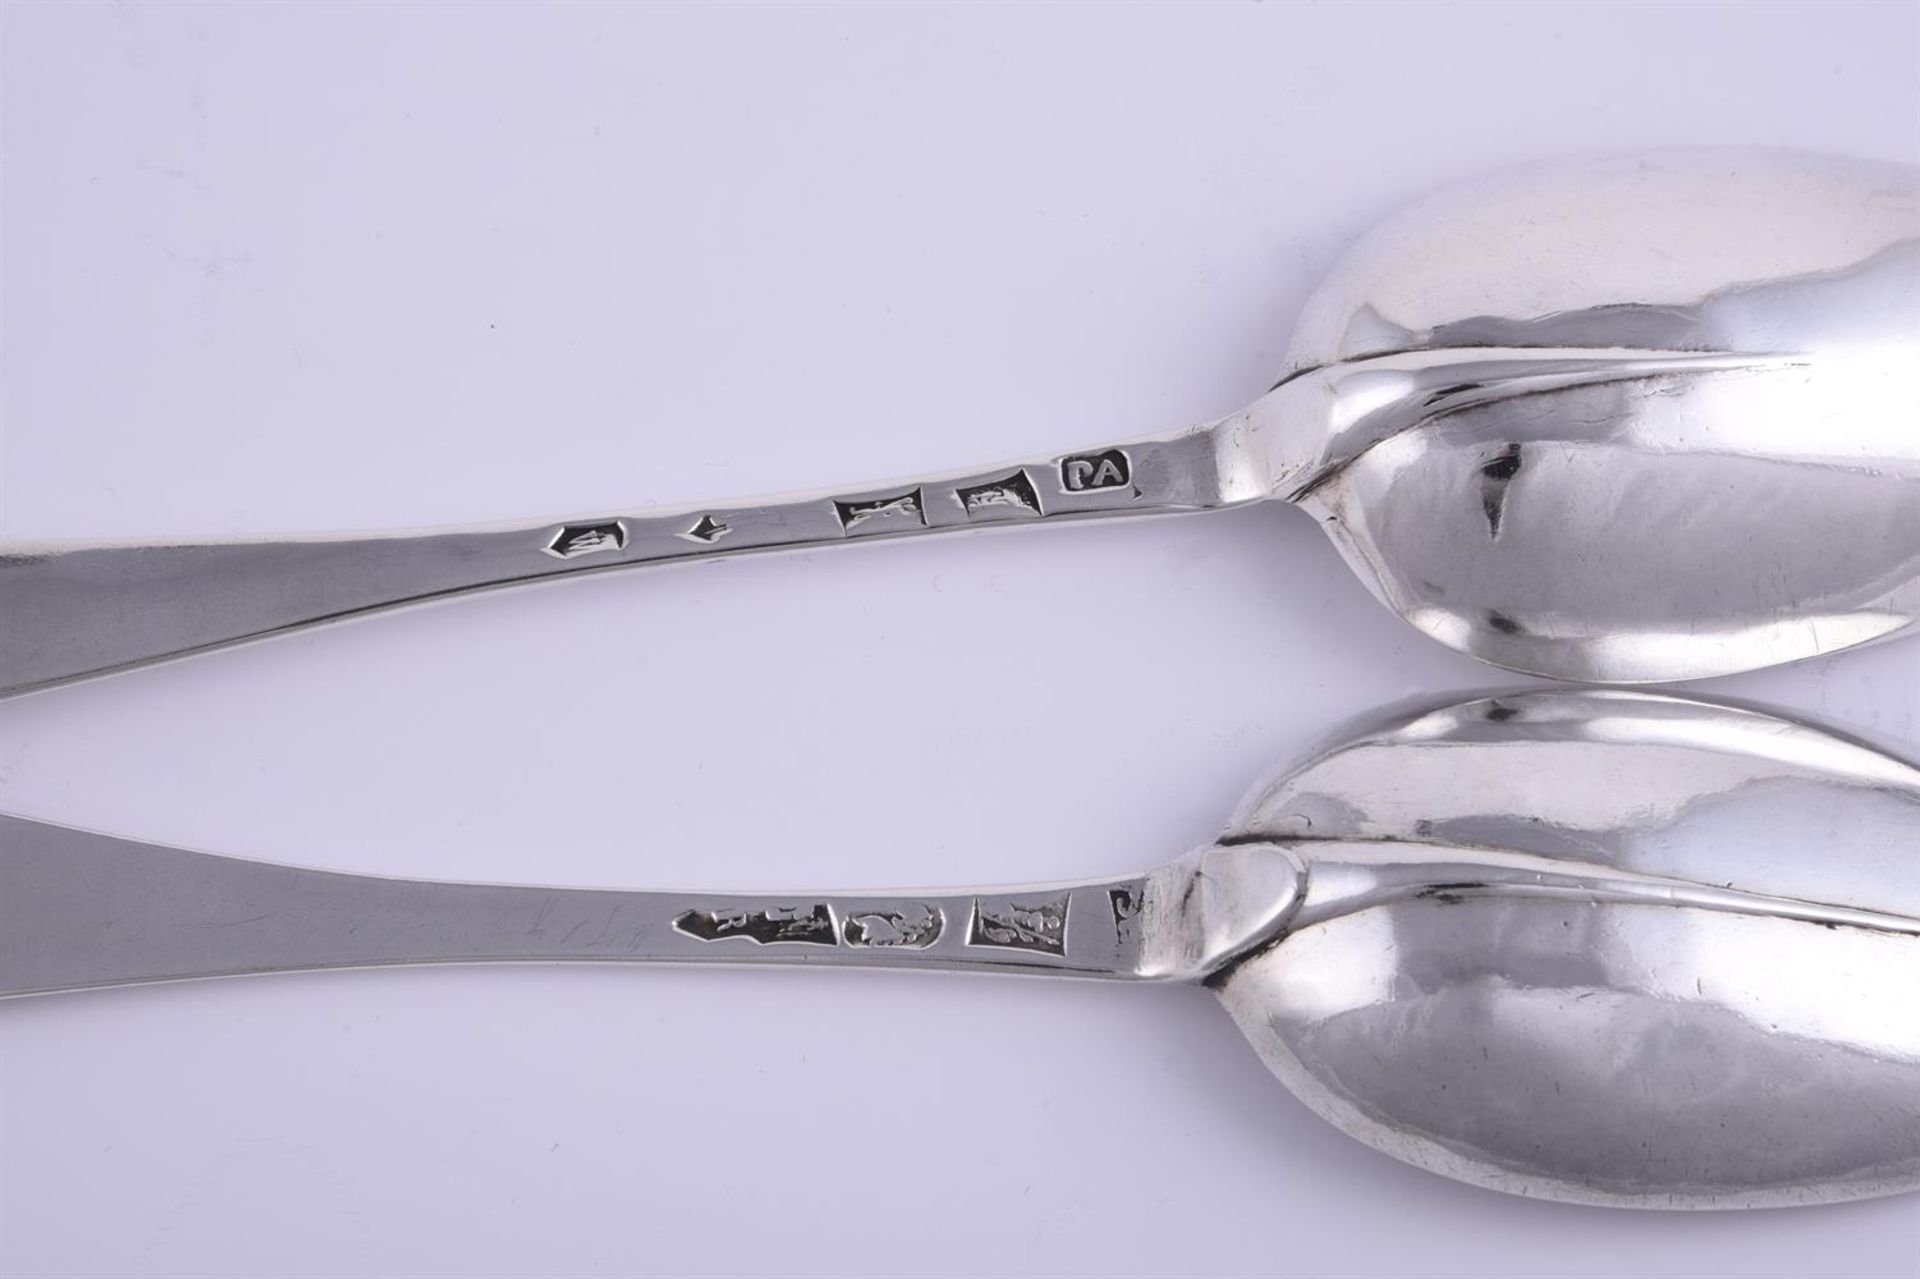 A GEORGE I WEST COUNTRY SILVER HANOVERIAN TABLE SPOON, MAKER'S MARK PA (NOT TRACED) - Image 2 of 3